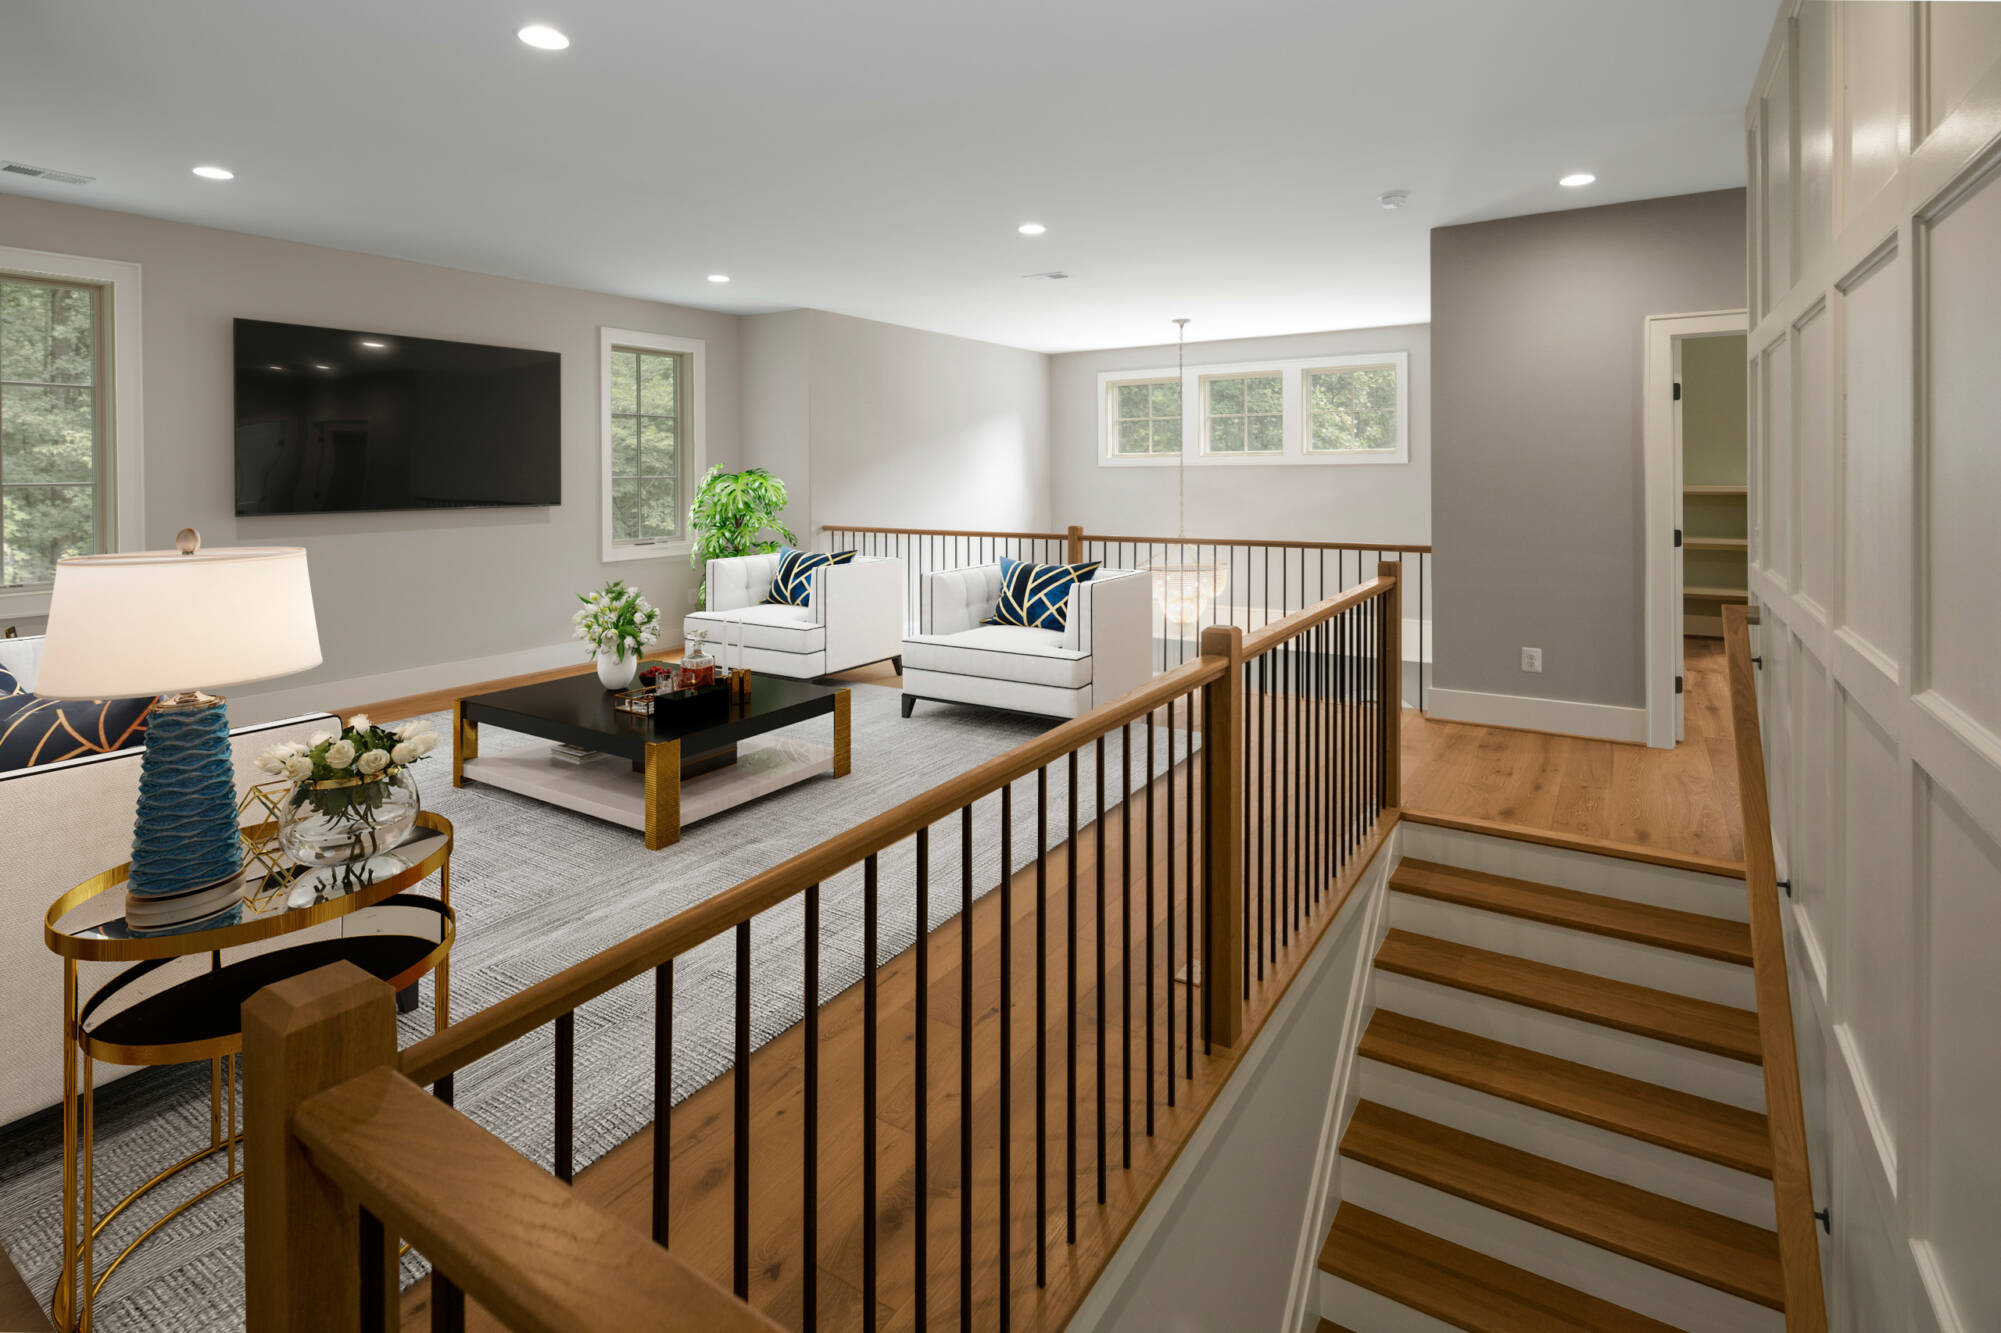 Interior of 2 story home by North Bethesda Builder builder